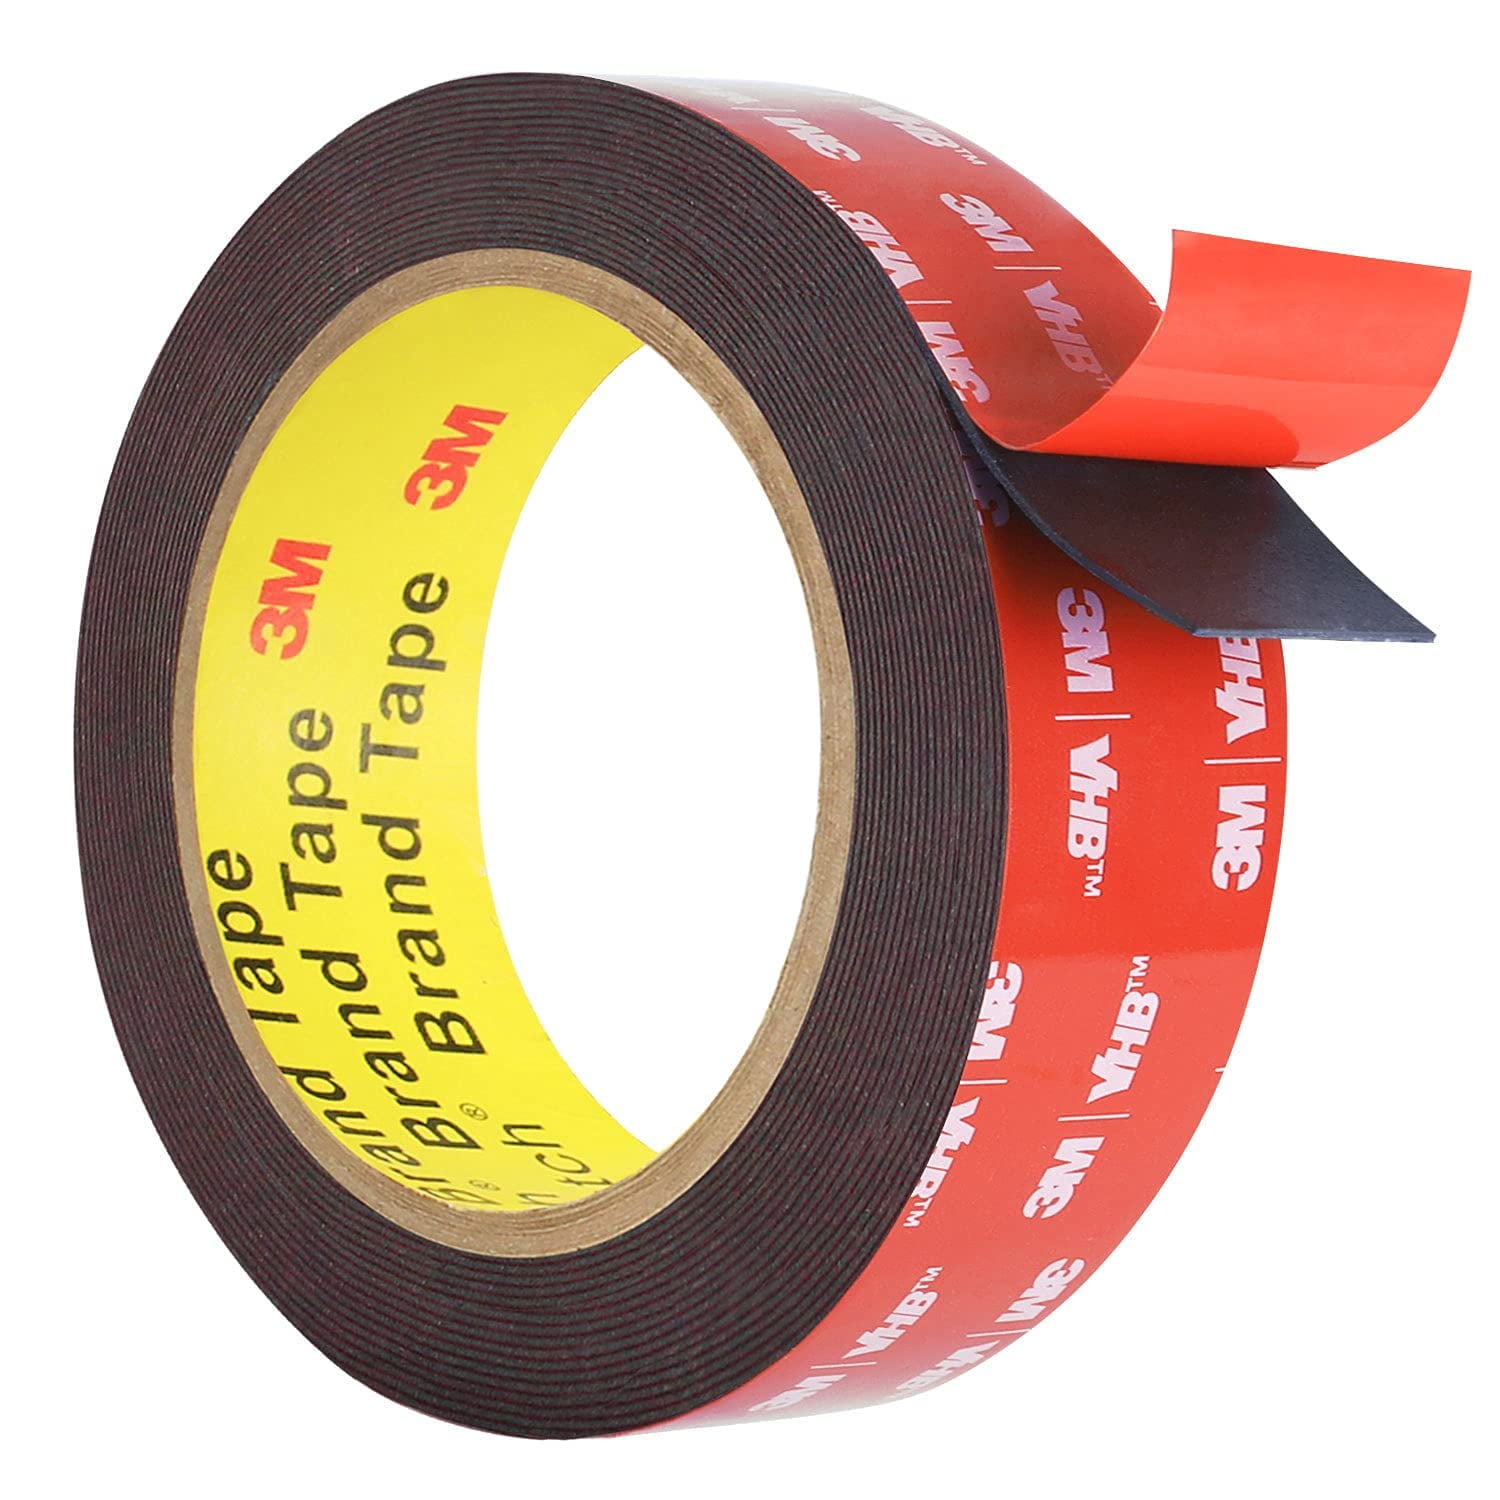 Kusufefi Double Sided Adhesive Tape Heavy Duty Double Stick Mounting (2 Rolls Total 20ft) Clear Two Sided Wall Tape Strips Removable Poster Tape